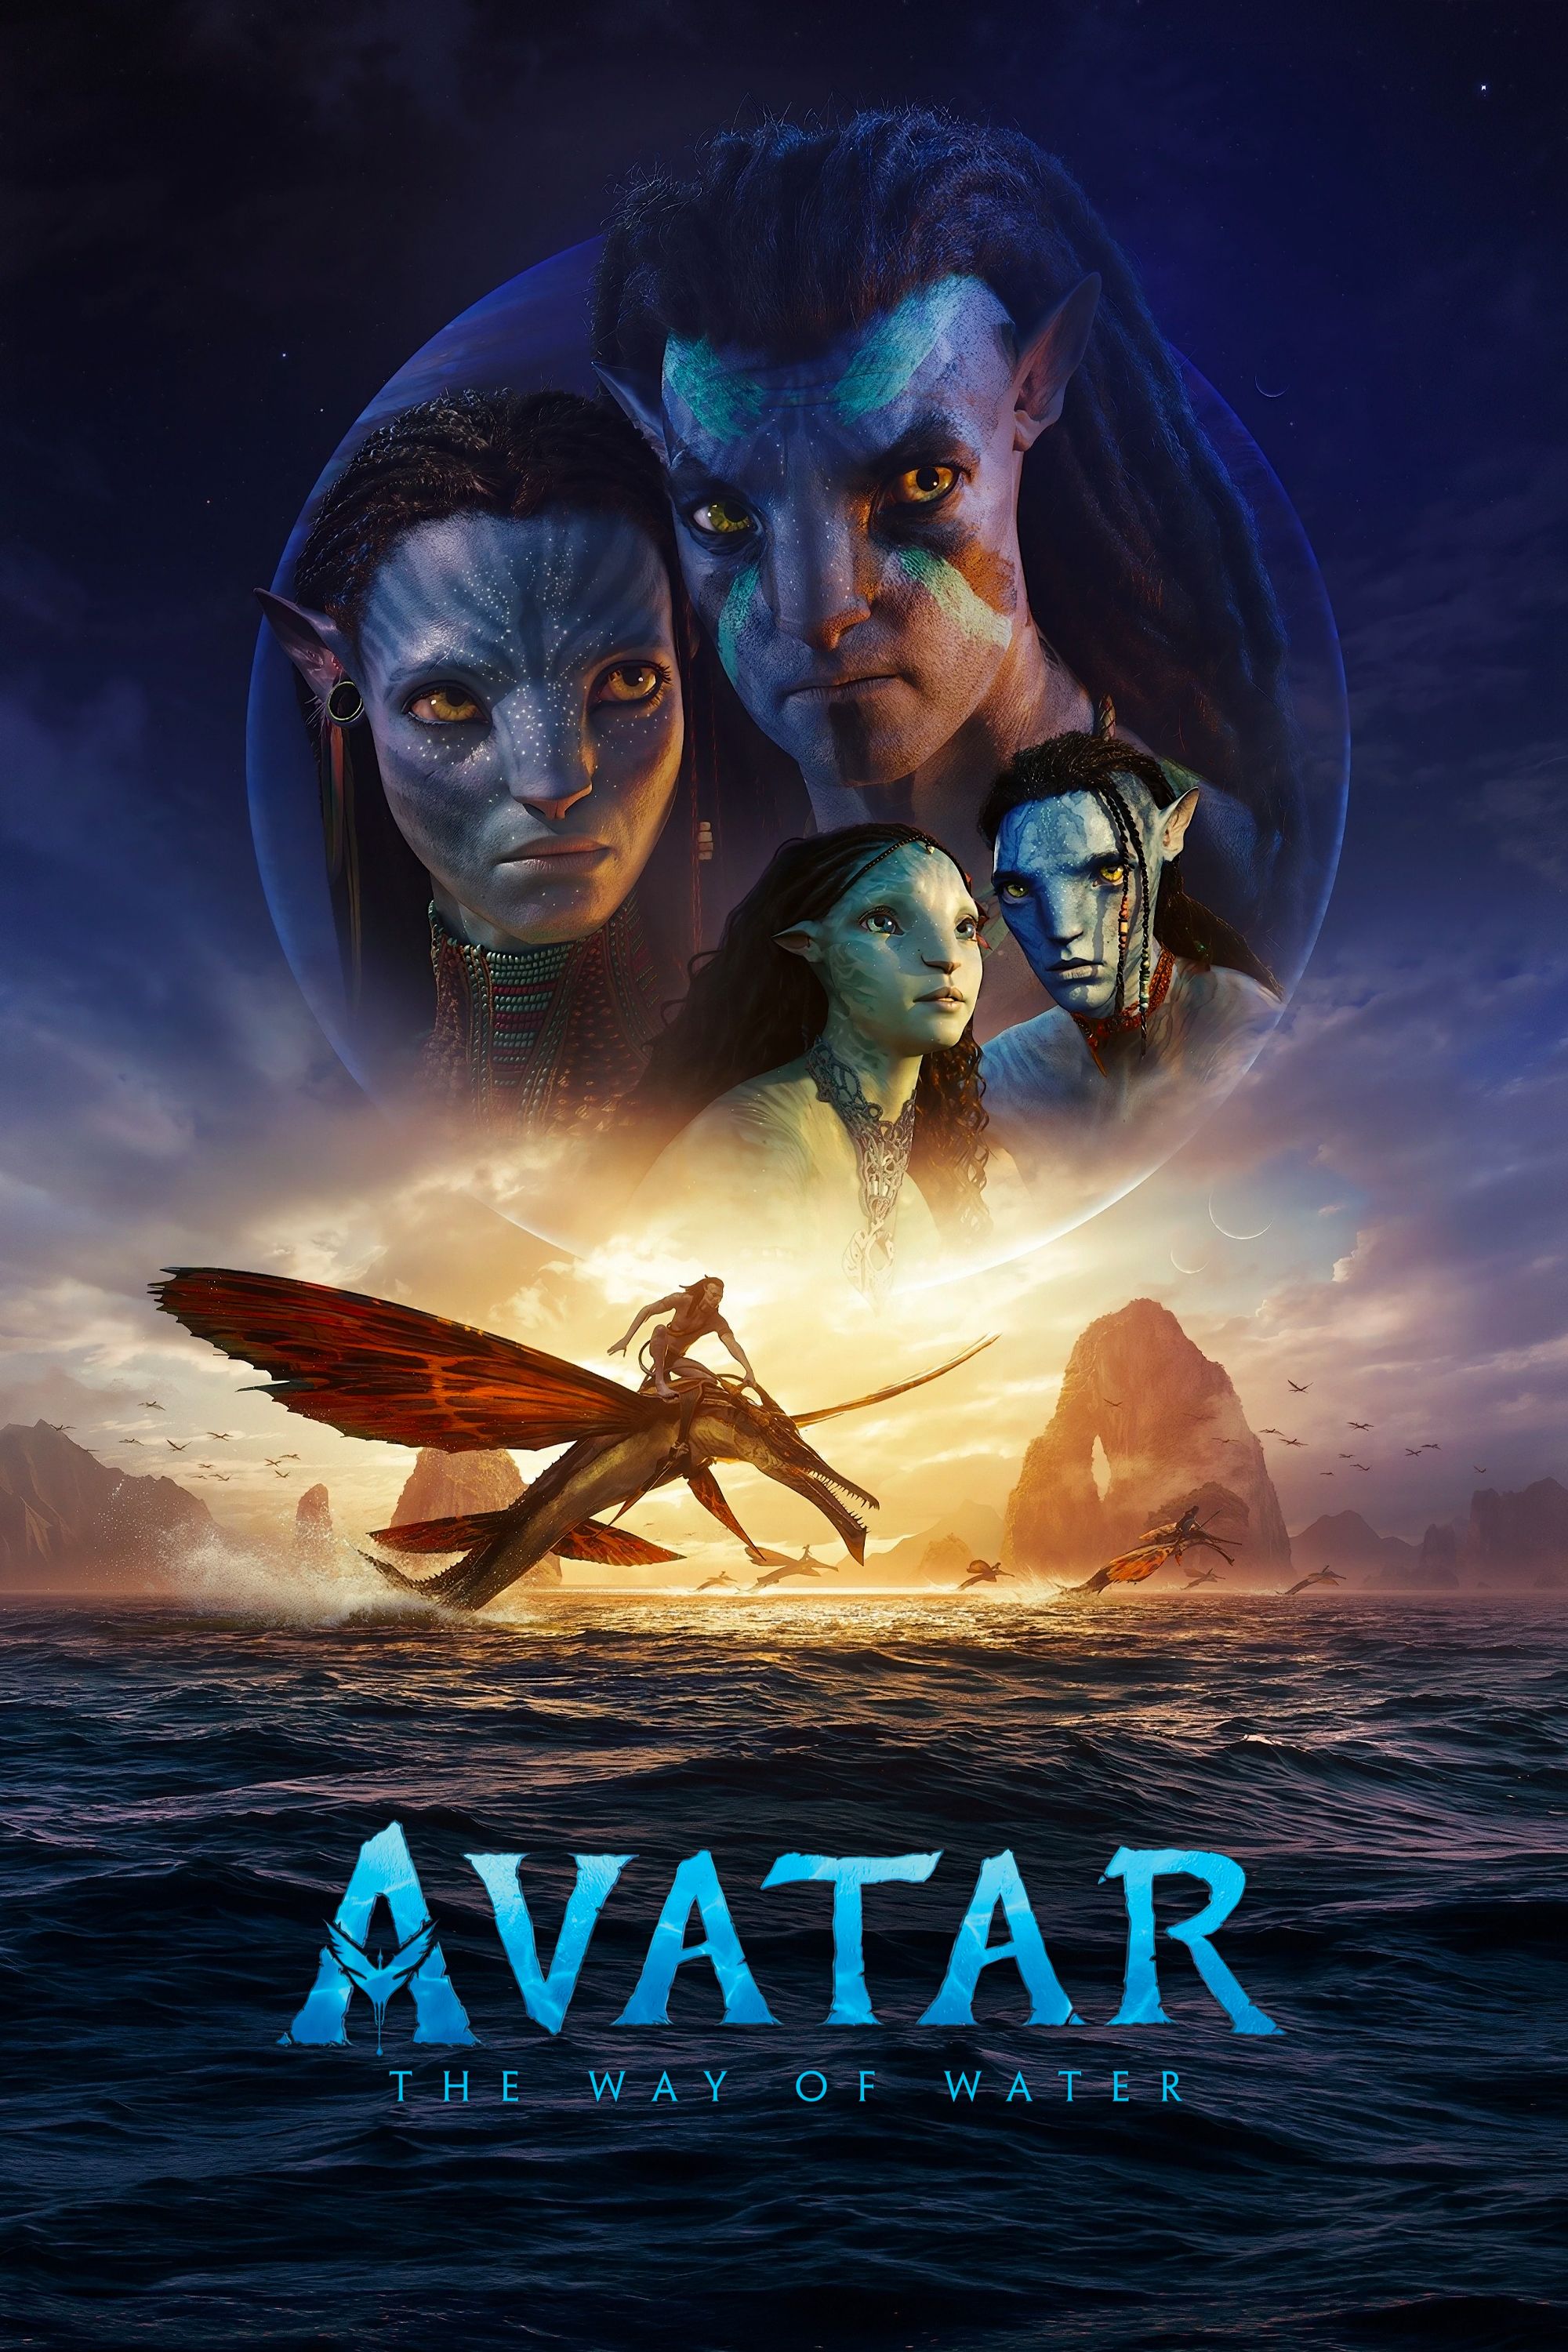 Avater The Way of Water Poster